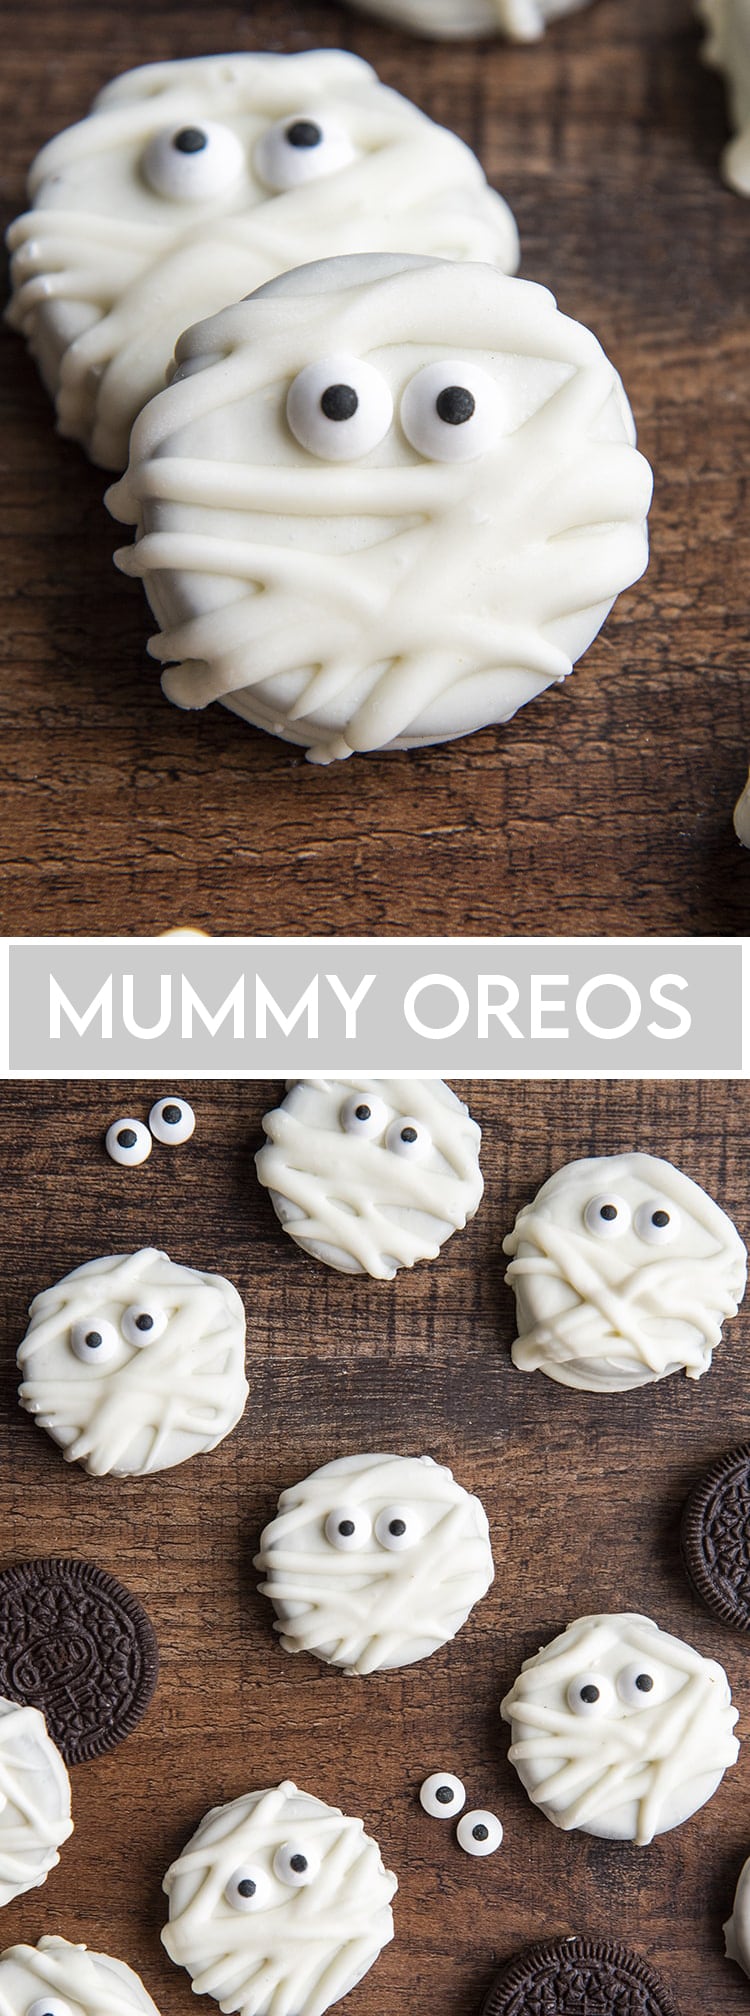 A collage of two photos of Oreos dipped in white chocolate and decorated to look like mummies.